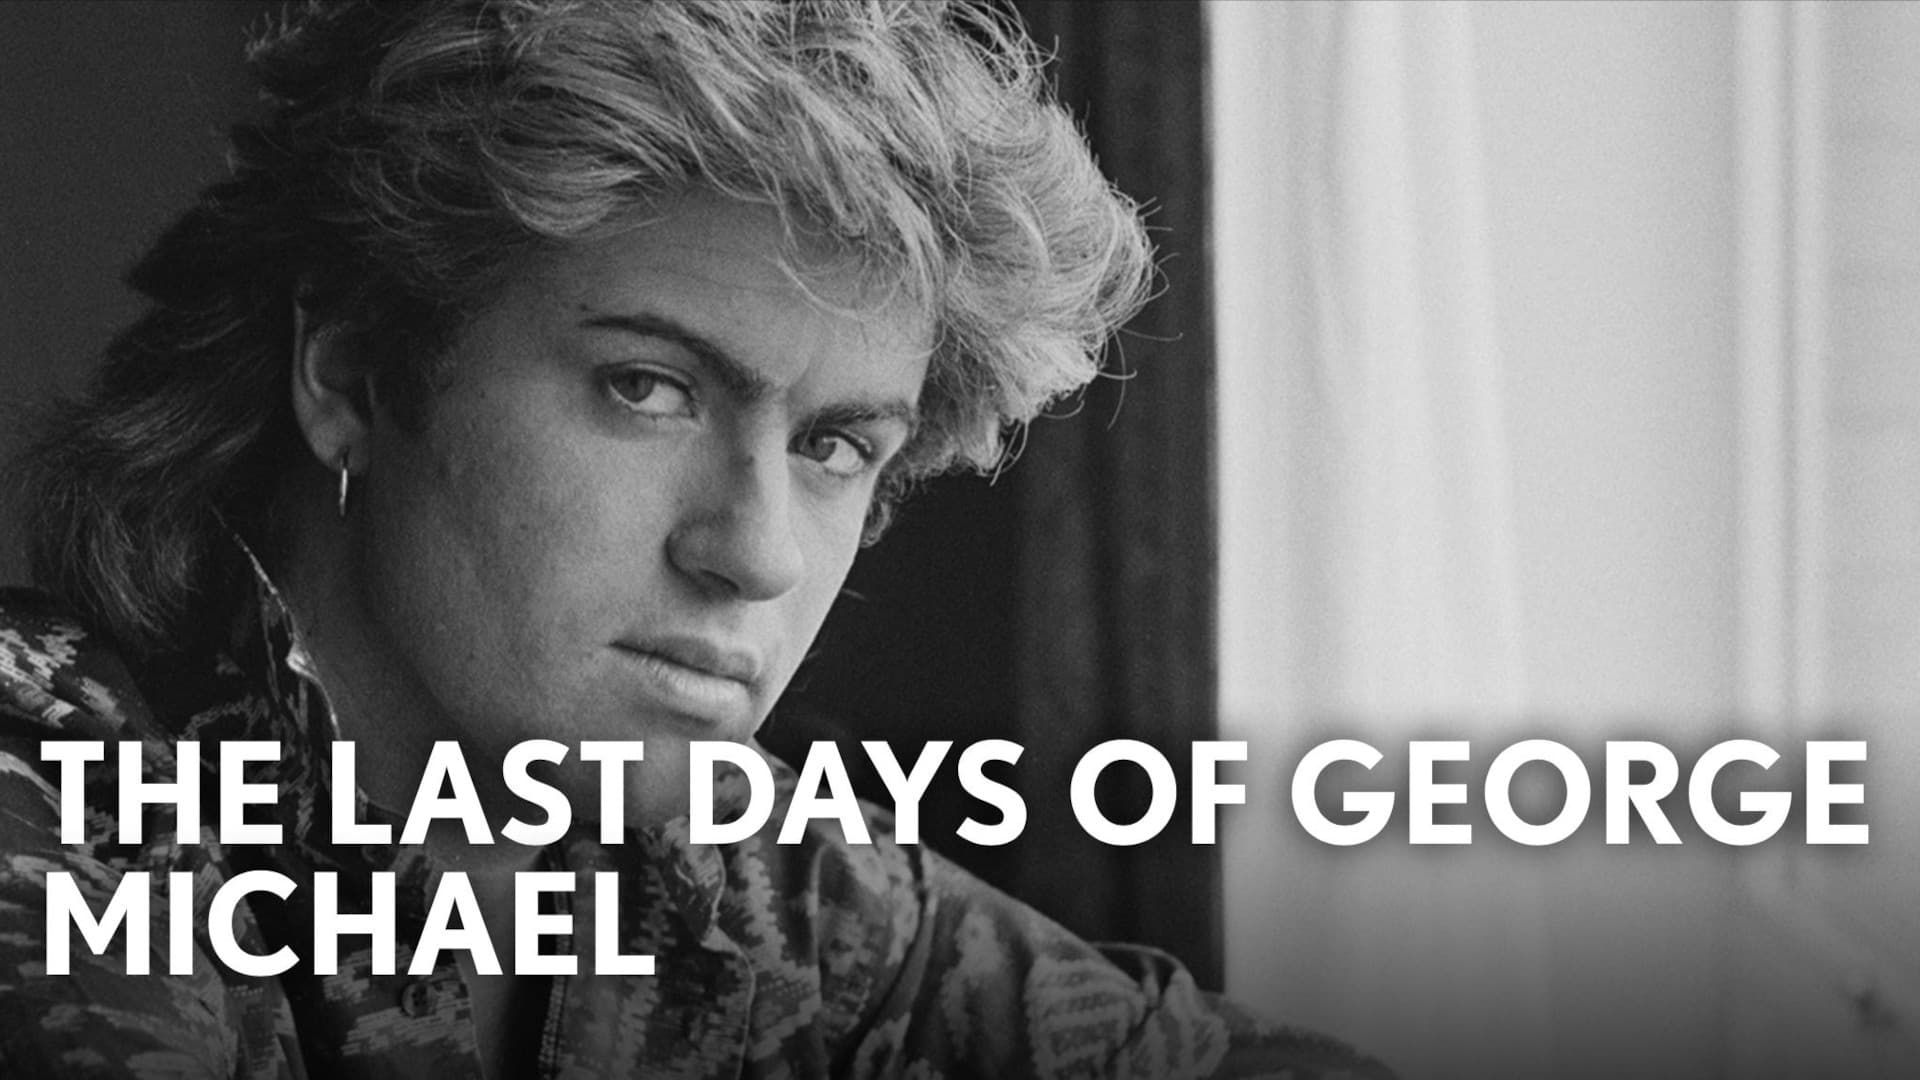 The Last Days of George Michael background